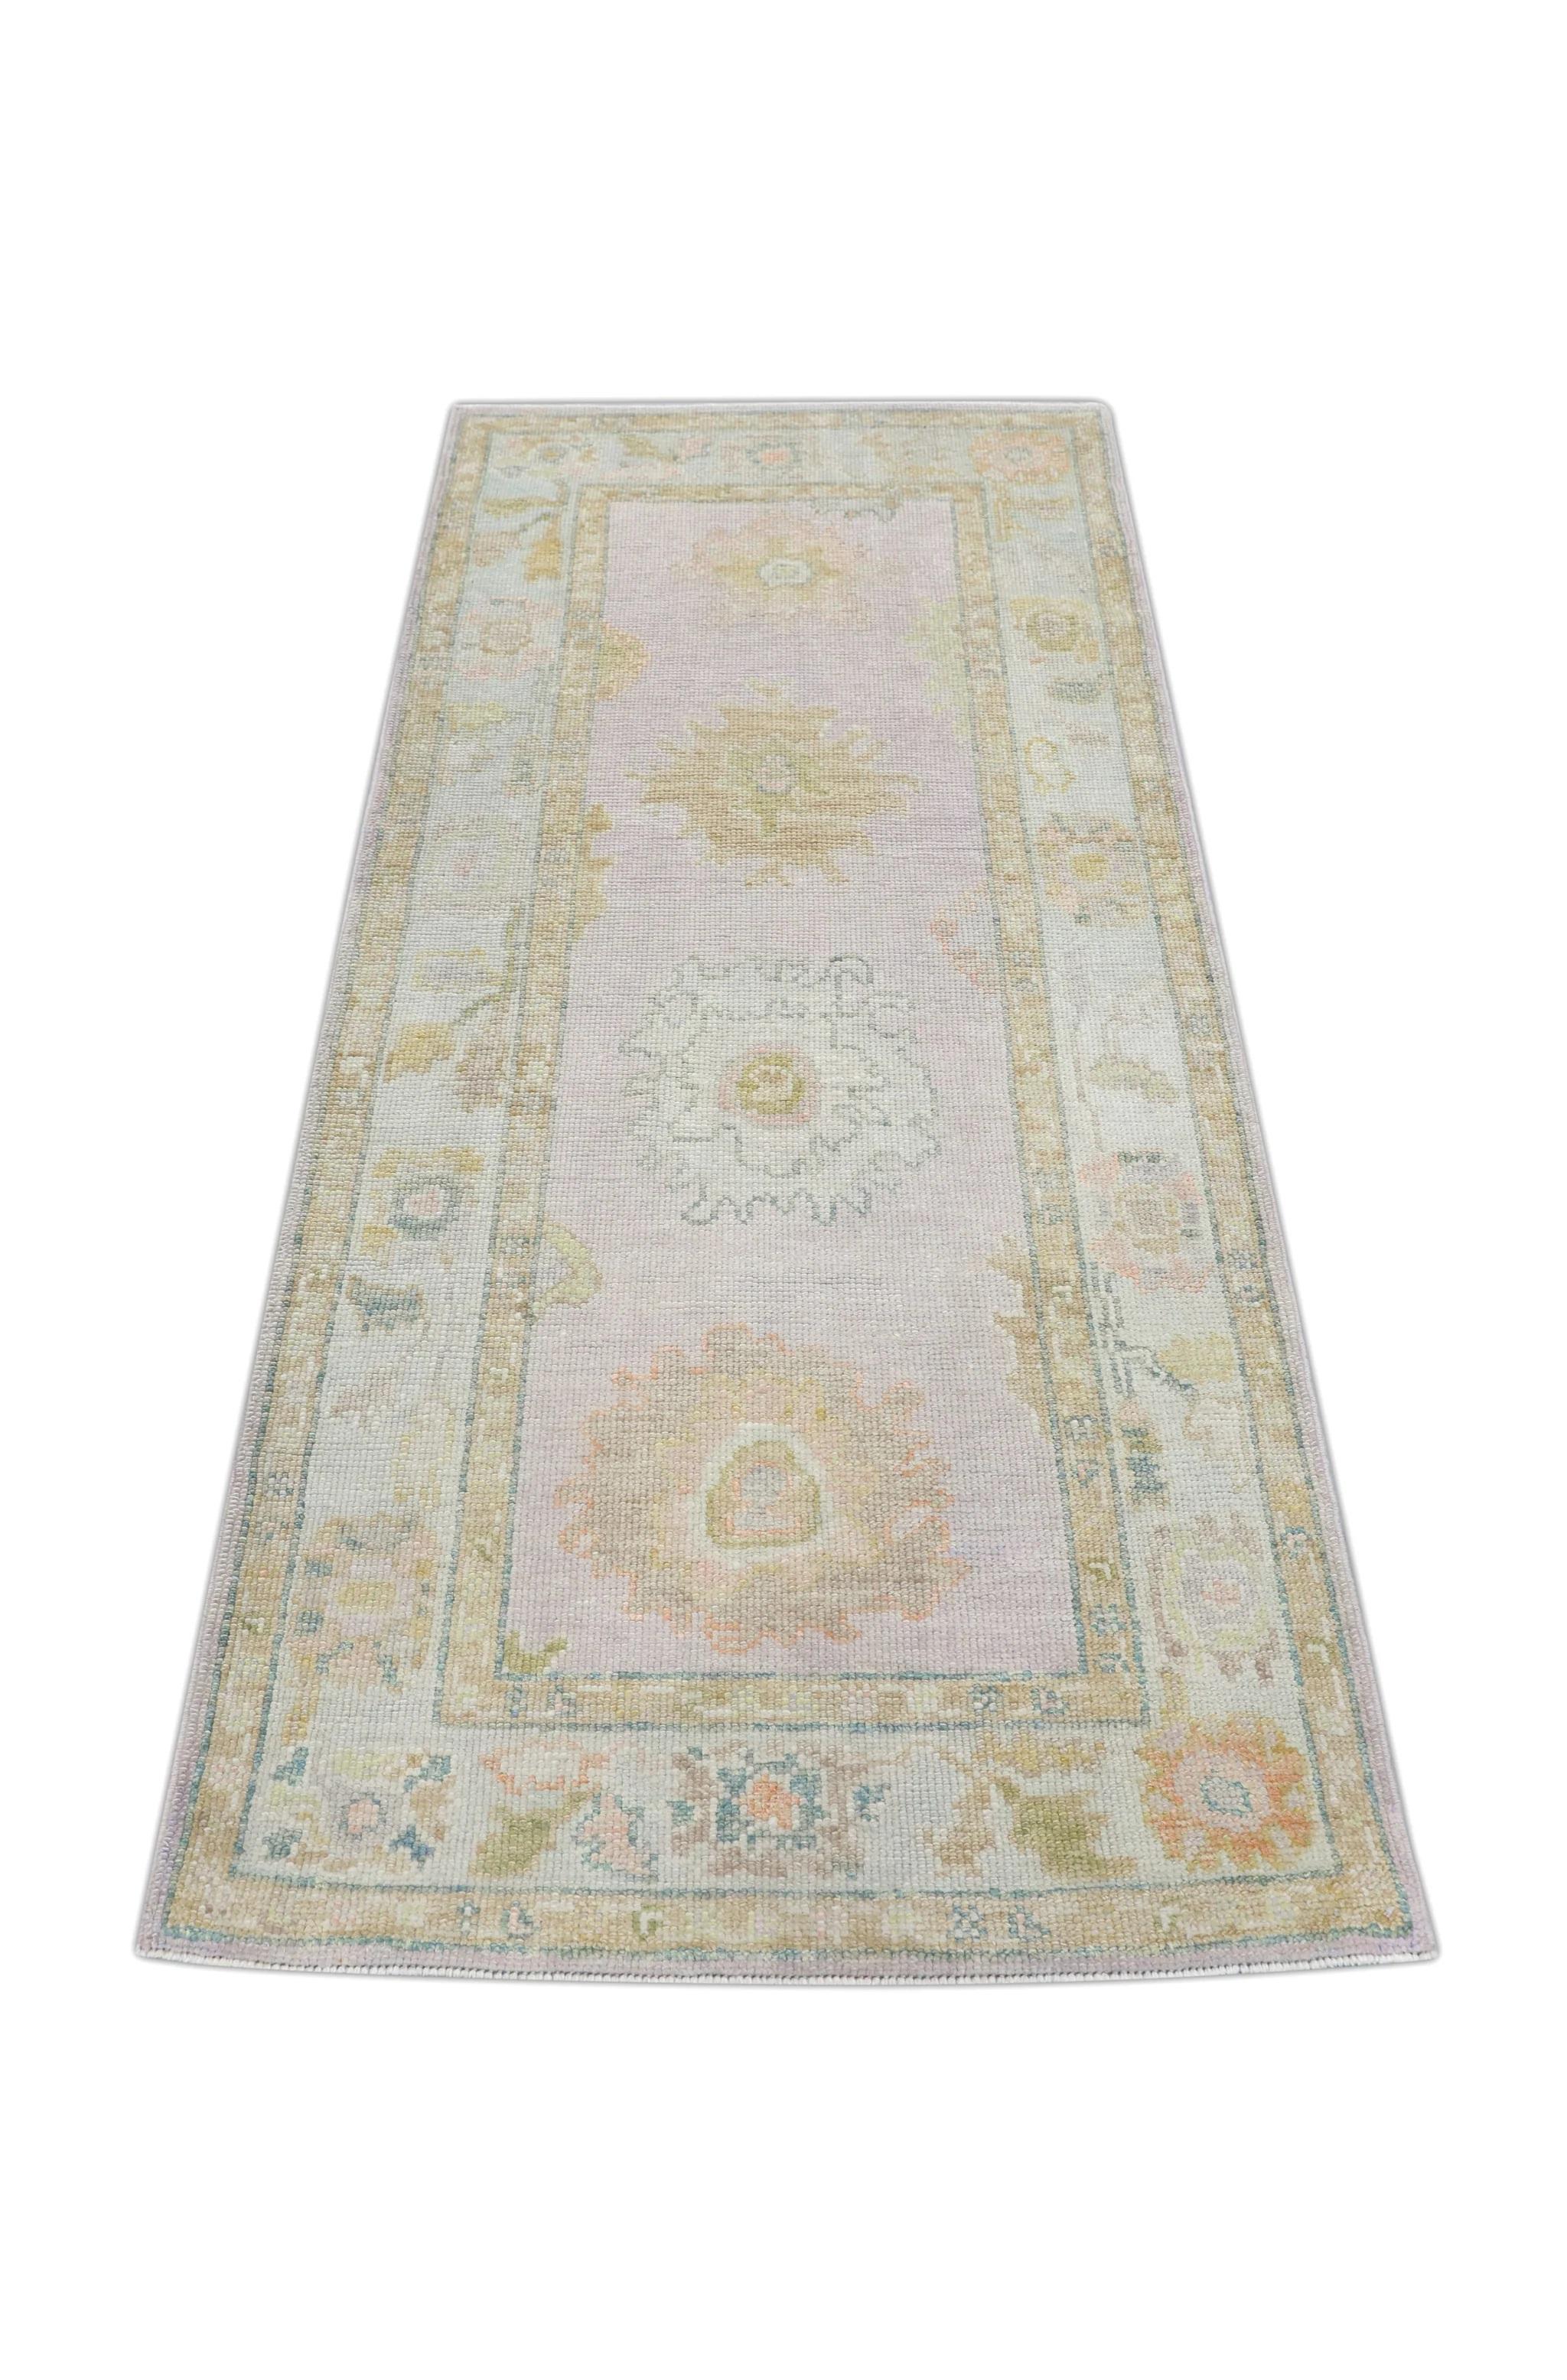 Handwoven Wool Turkish Oushak Rug with Pastel Colors and Floral Design 3' x 6'8